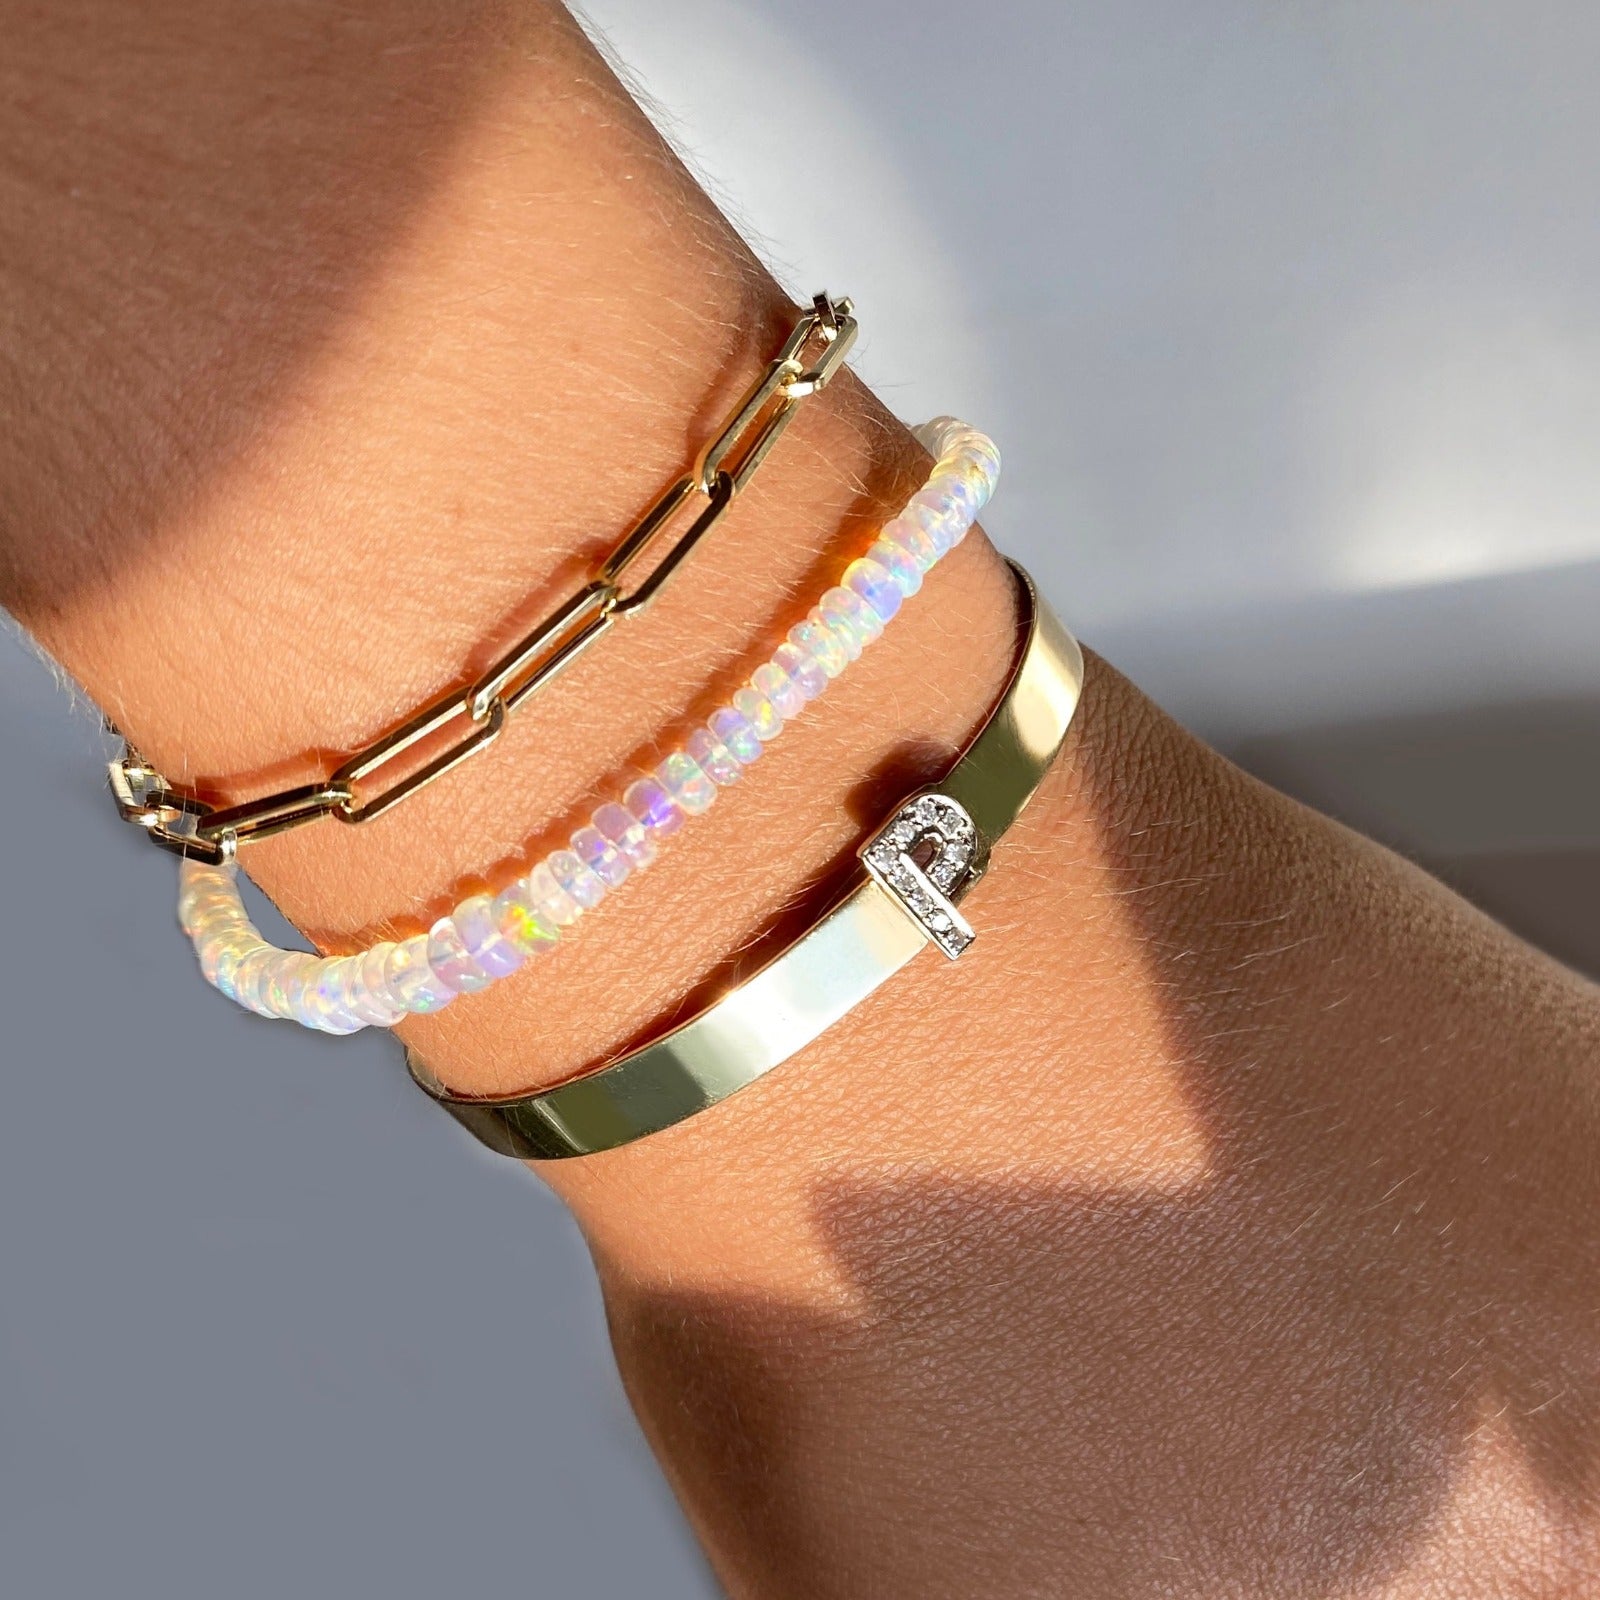 Shimmering beaded bracelet made of faceted opals in shades of milky white and clear on a gold linking lobster clasp. Styled on a wrist layered with a chunky paperclip chain bracelet and diamond letter bangle.